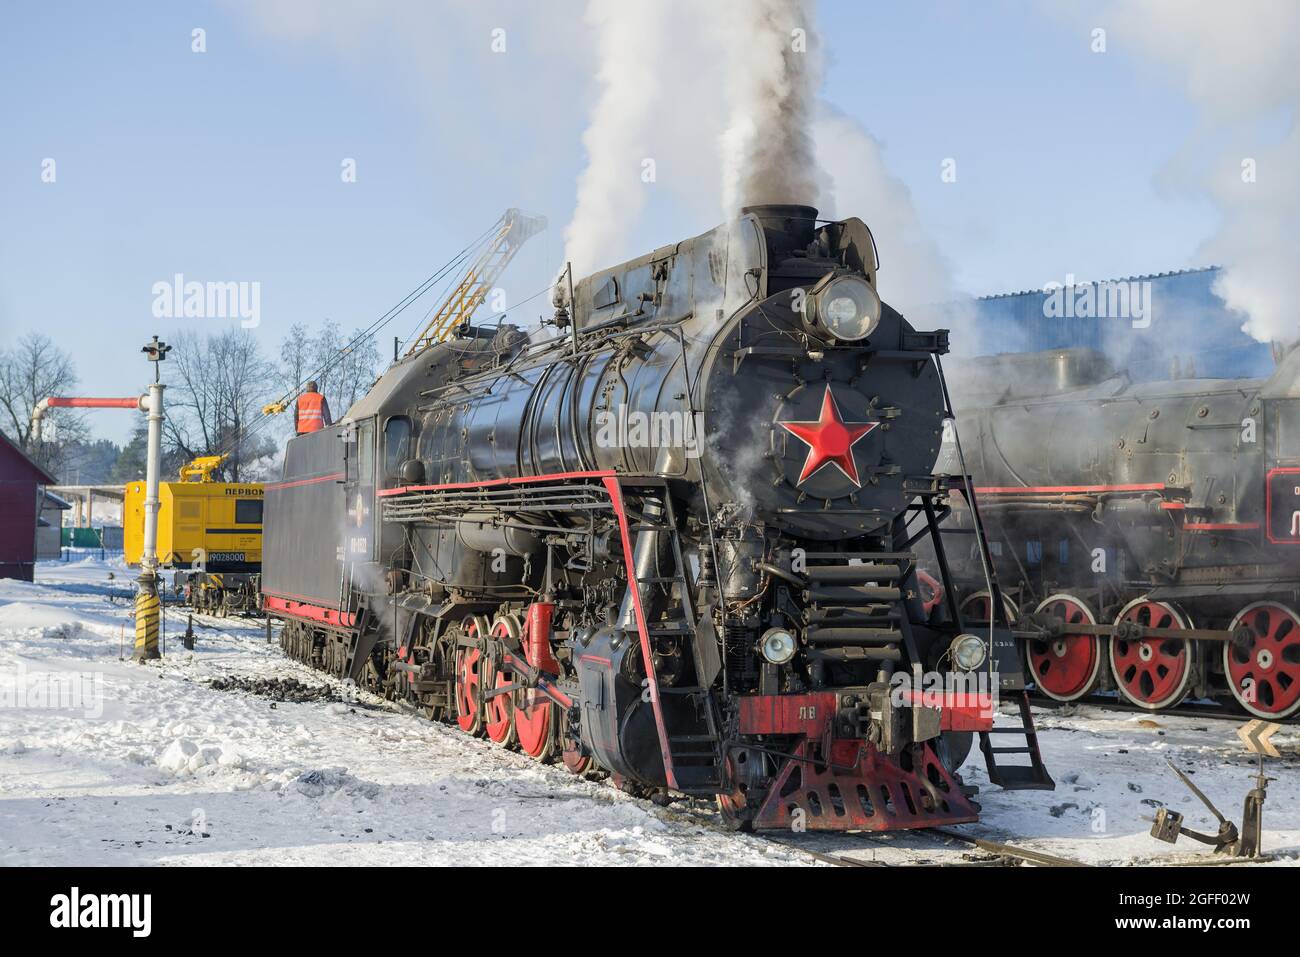 SORTAVALA, RUSSIA - MARCH 10, 2021: Old Soviet cargo steam locomotive of the 'LV' series at the Sortavala station on a frosty winter morning Stock Photo